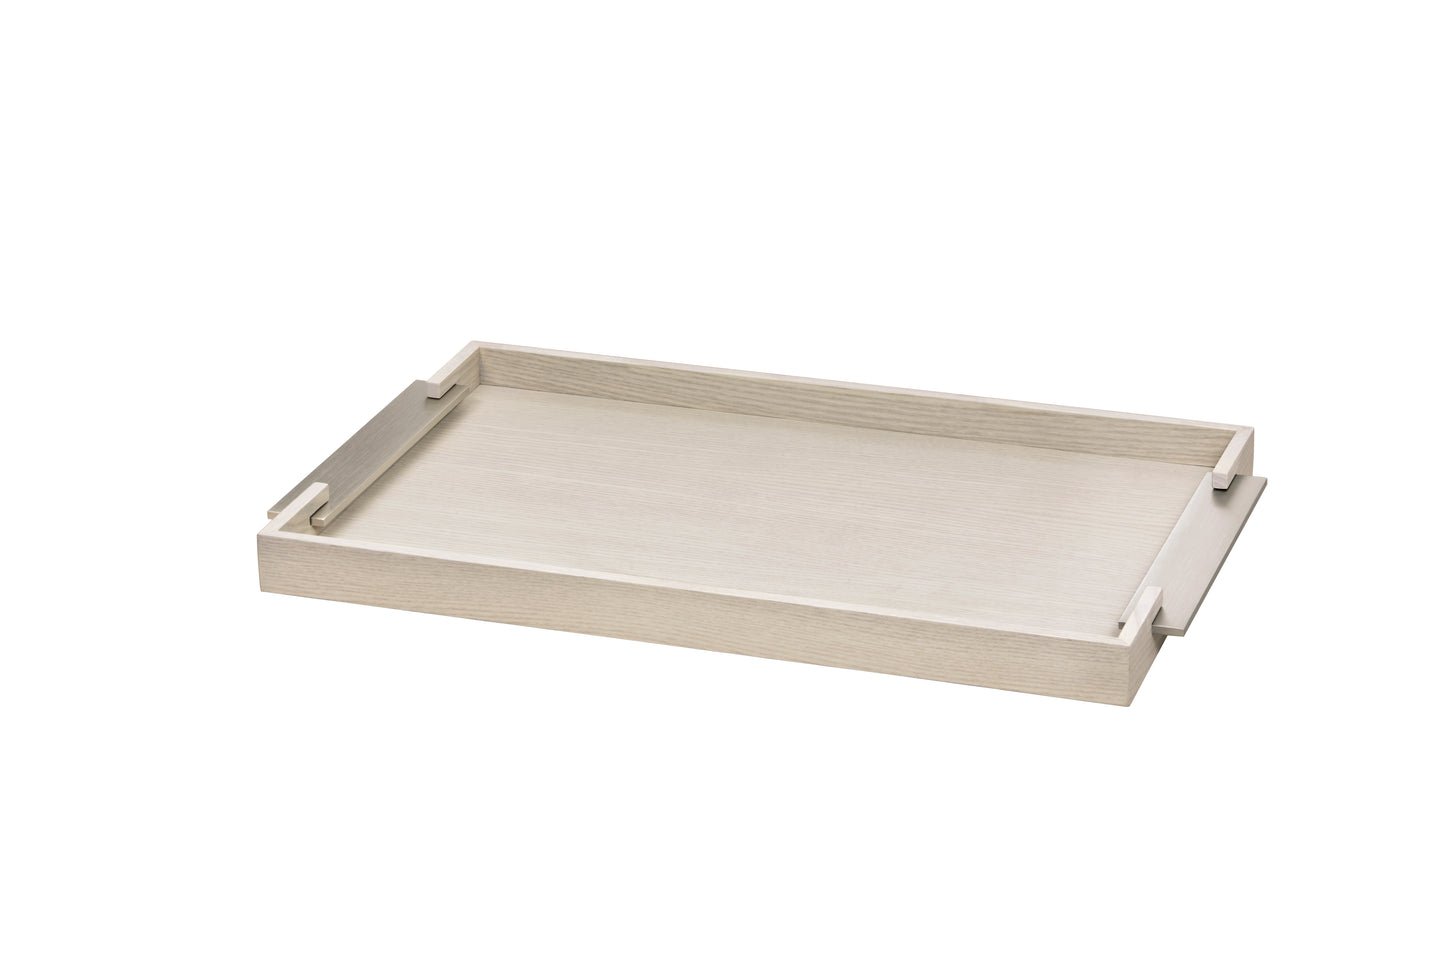 Dama Rectangular Wood Tray with Brushed Metal Handles | Elegant and Functional Design | Perfect for Serving or Home Decor | Explore a Range of Stylish Trays at 2Jour Concierge, #1 luxury high-end gift & lifestyle shop